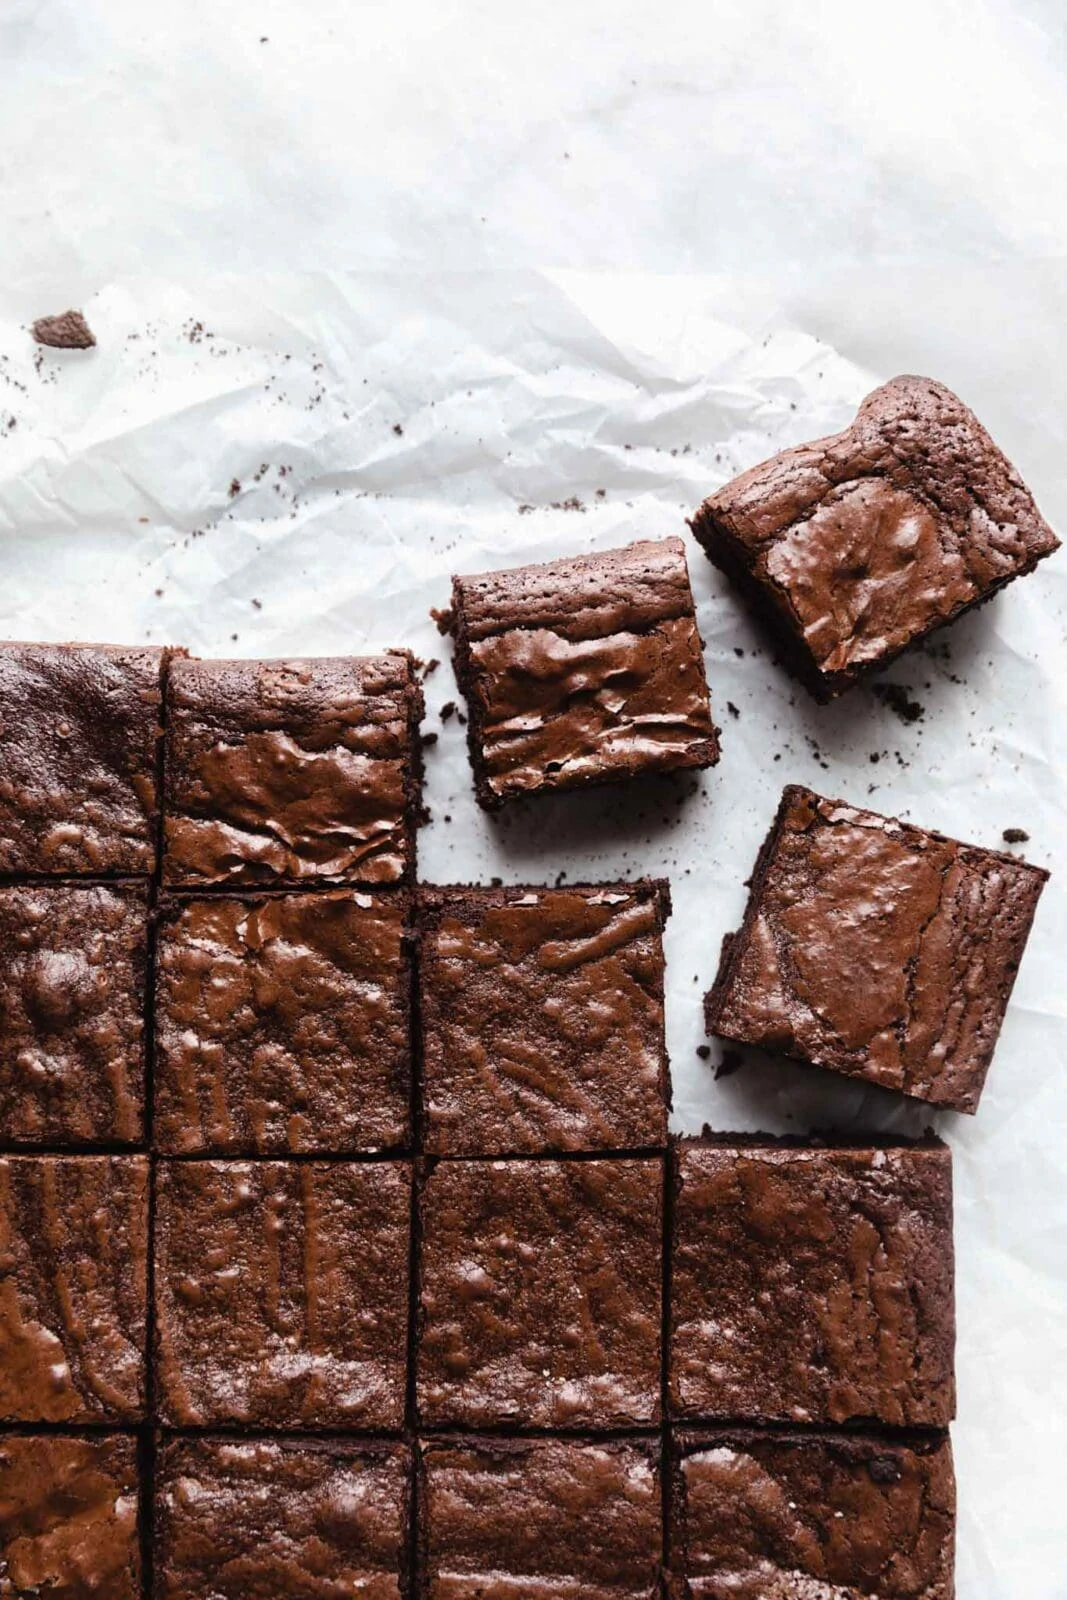 Easy One Bowl Brownies Recipe - 8 Ingredients and 10 Minutes!